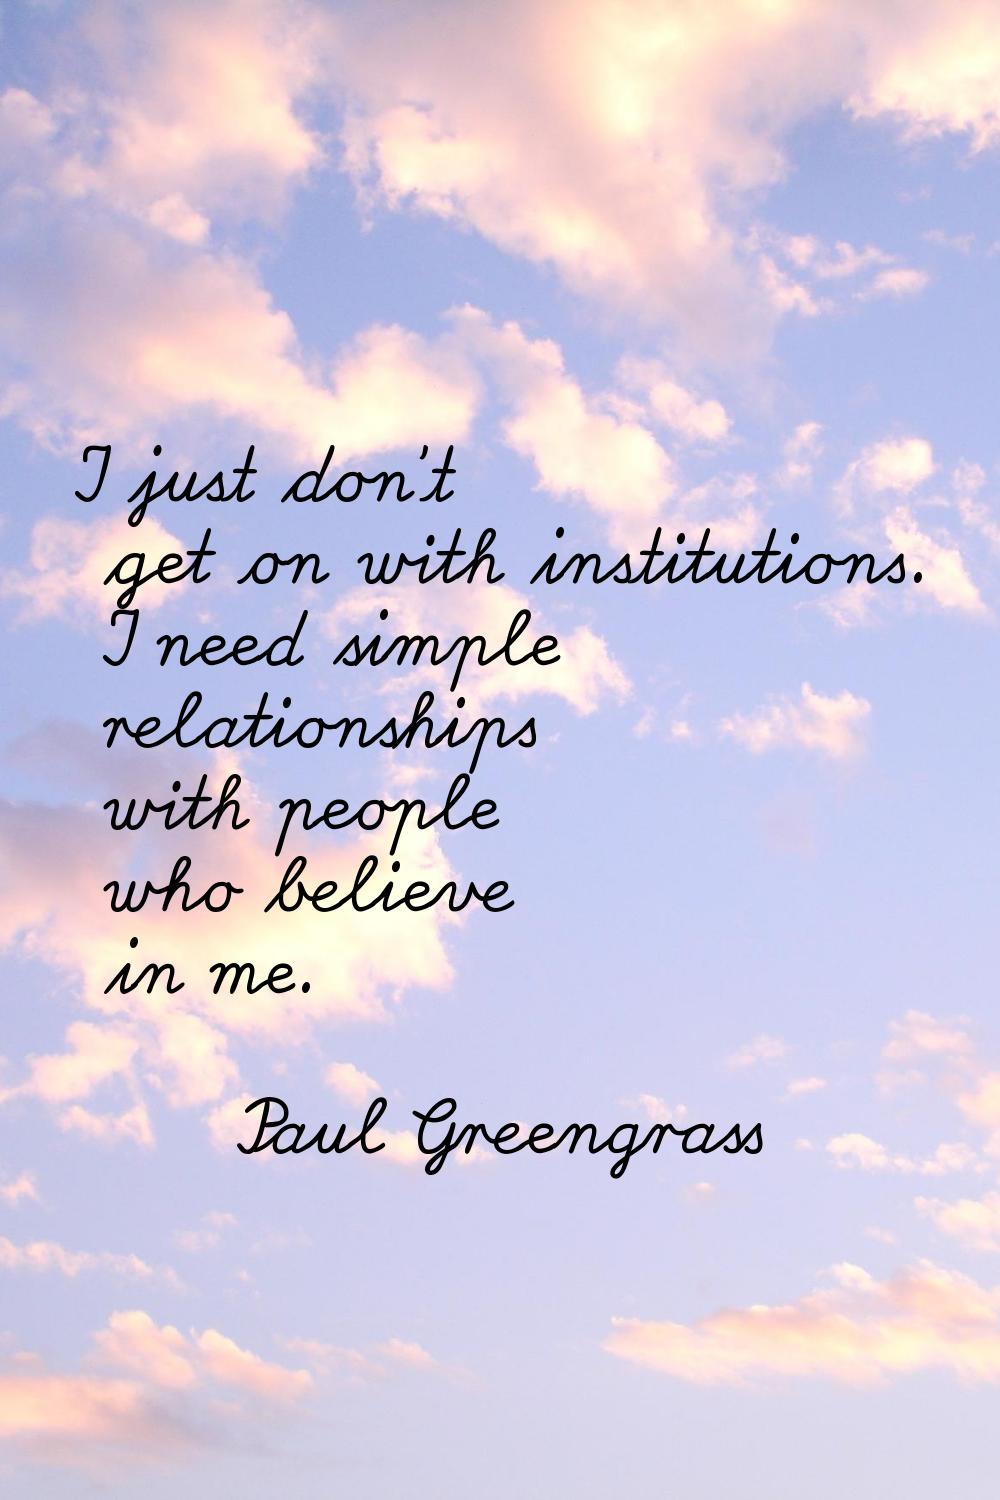 I just don't get on with institutions. I need simple relationships with people who believe in me.